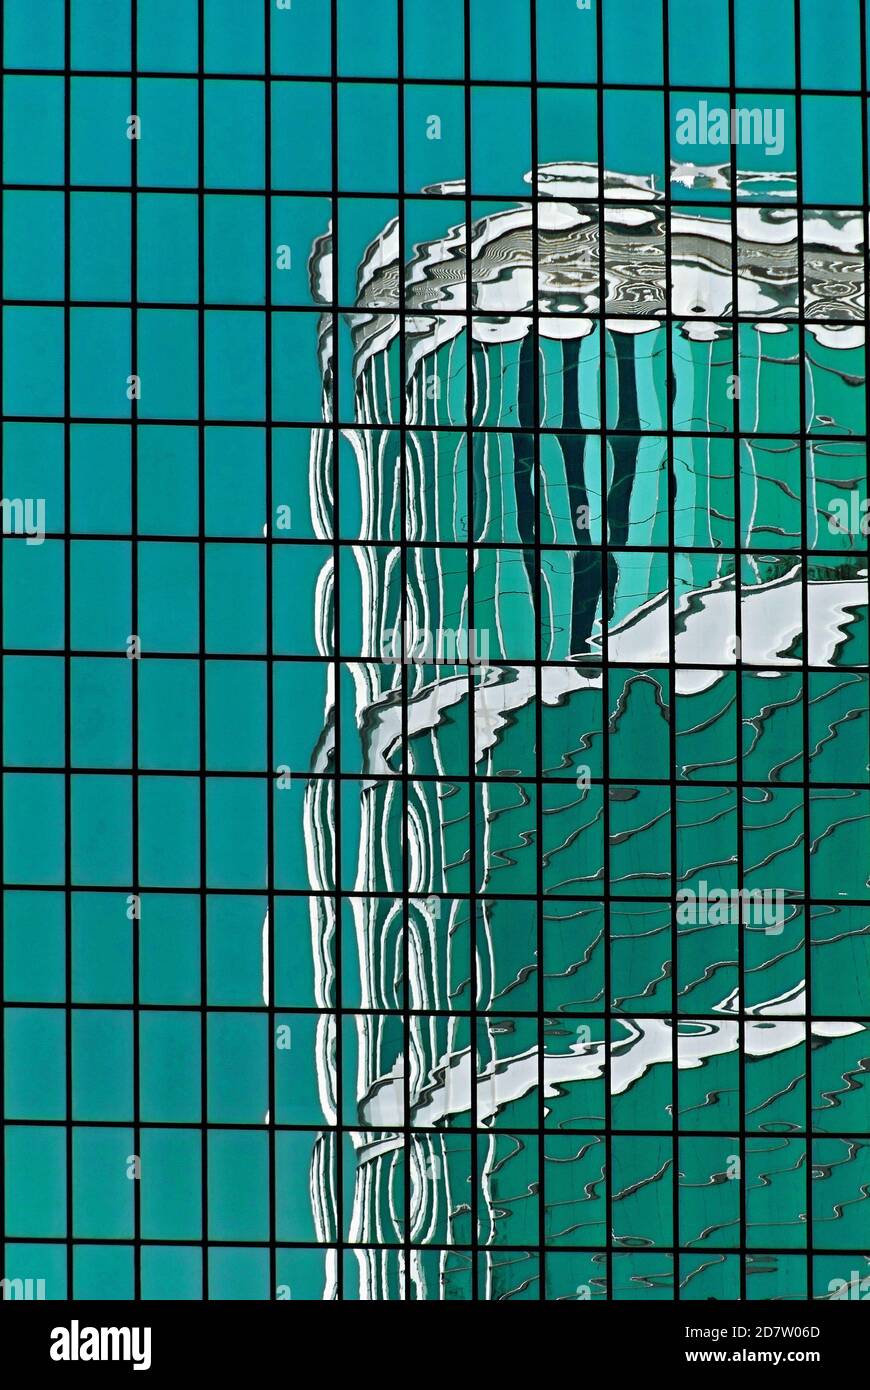 Digital art from an original photograph of the upper levels of the 33-storey CITIC Tower in Hong Kong, China, reflected in the reflective cladding of a nearby high-rise building.  The CITIC Tower, corporate headquarters of the CITIC Pacific Ltd conglomerate, was built in 1997 on a site in Tim Mei Avenue in the Admiralty central business district.  It rises to a height of 126 metres (413 feet) and offers fine views over historic Victoria Harbour. Stock Photo